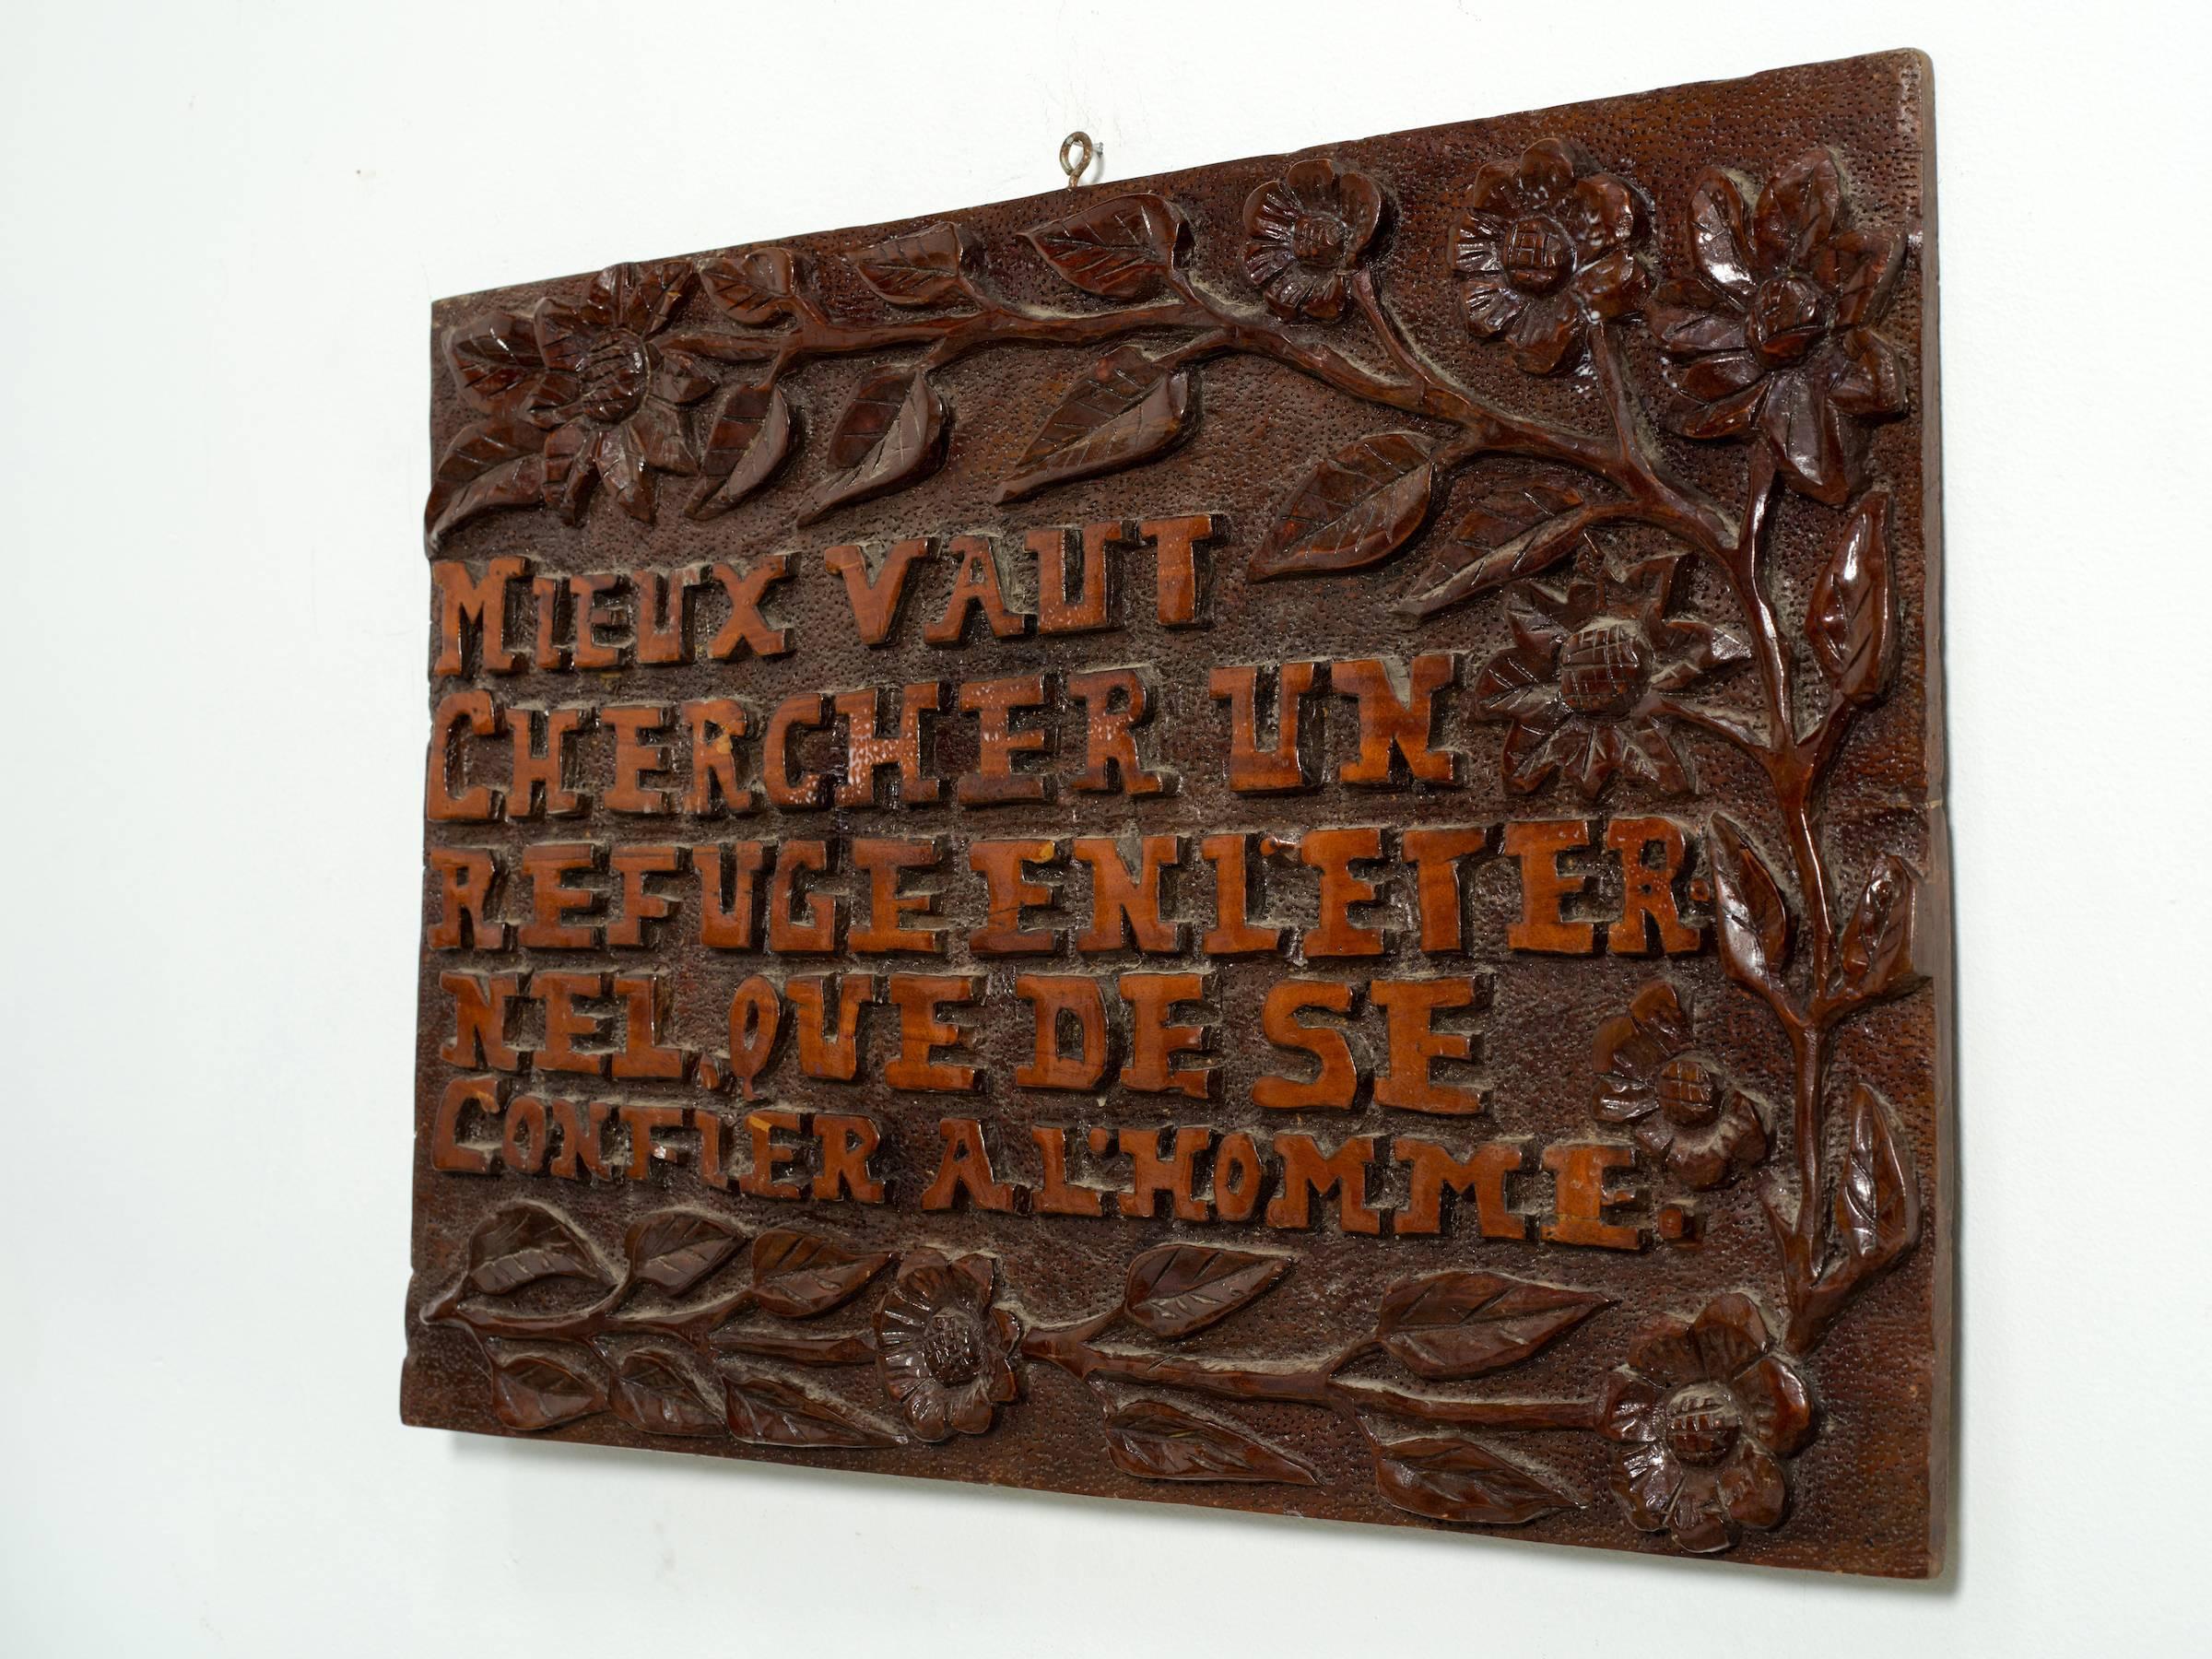 European Carved Wood Sign in French